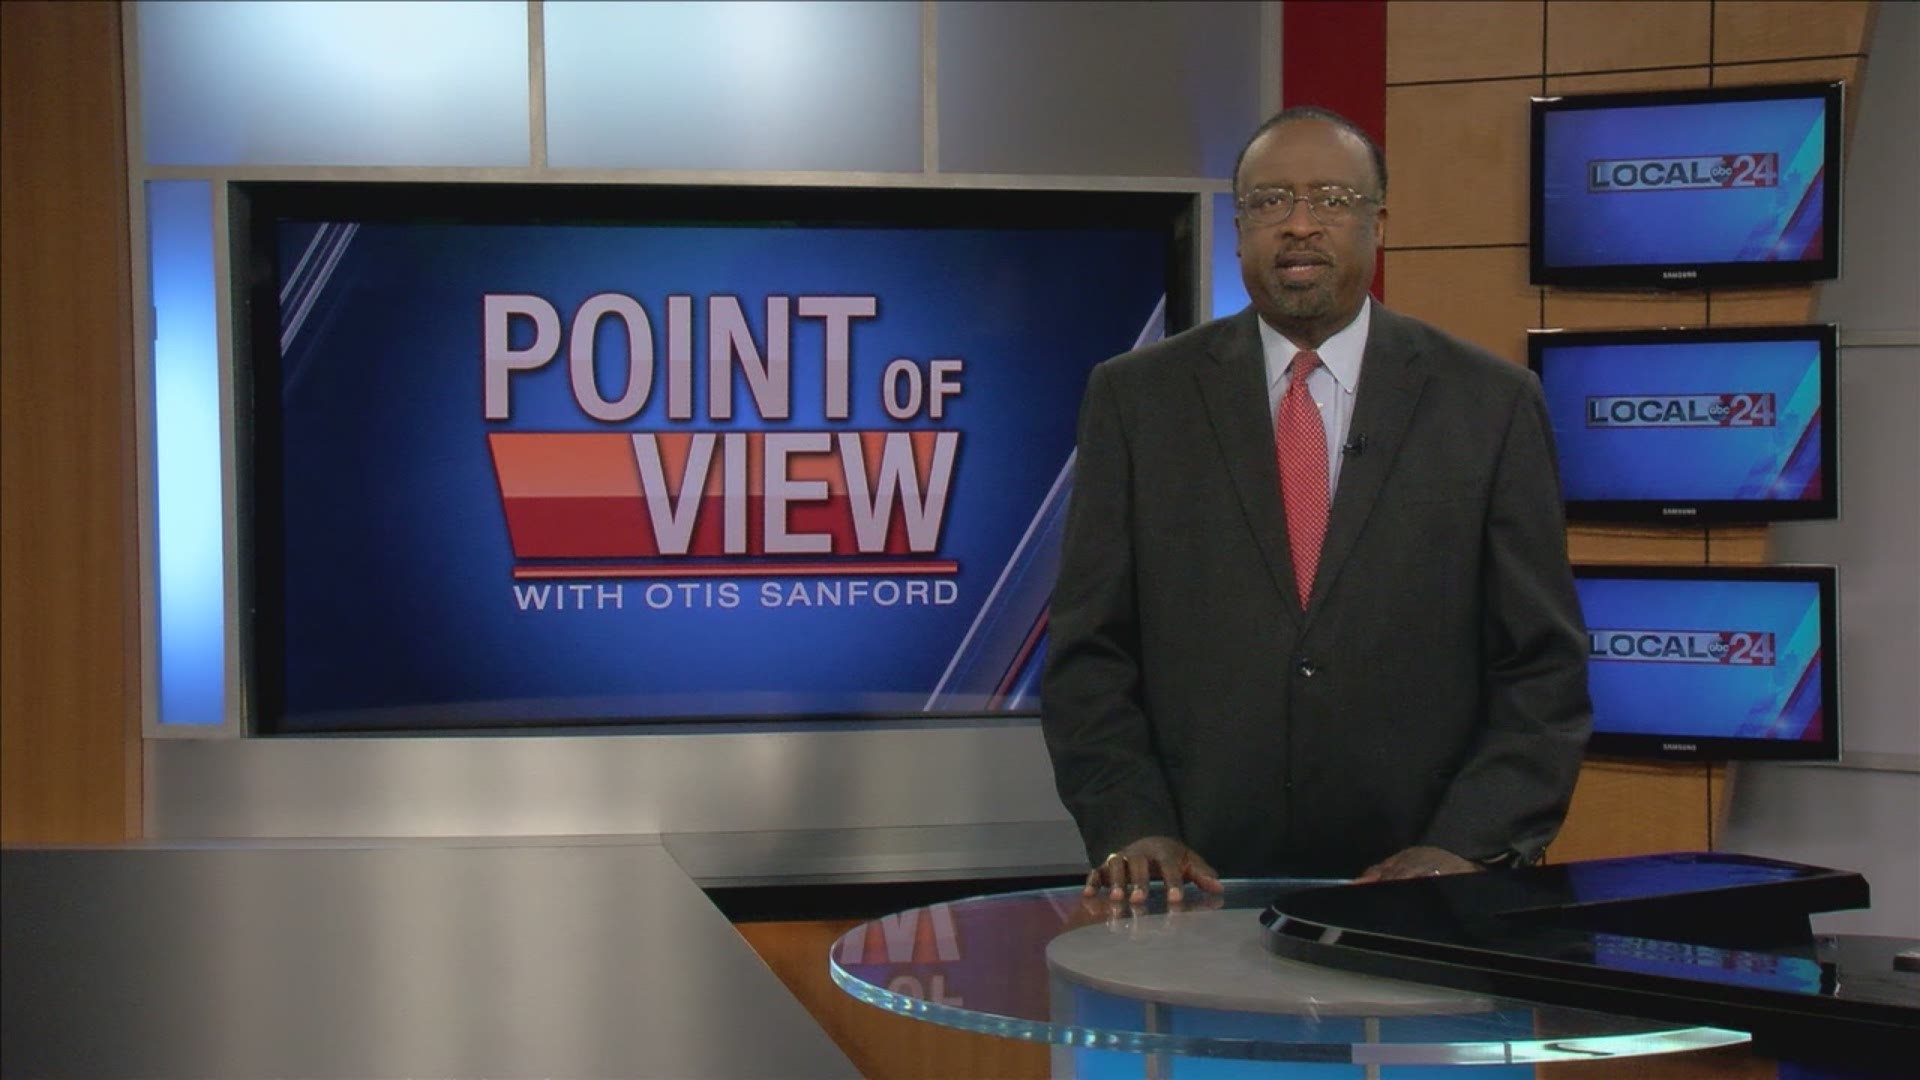 Local 24 News political analyst and commentator Otis Sanford shares his point of view on the importance of social distancing.